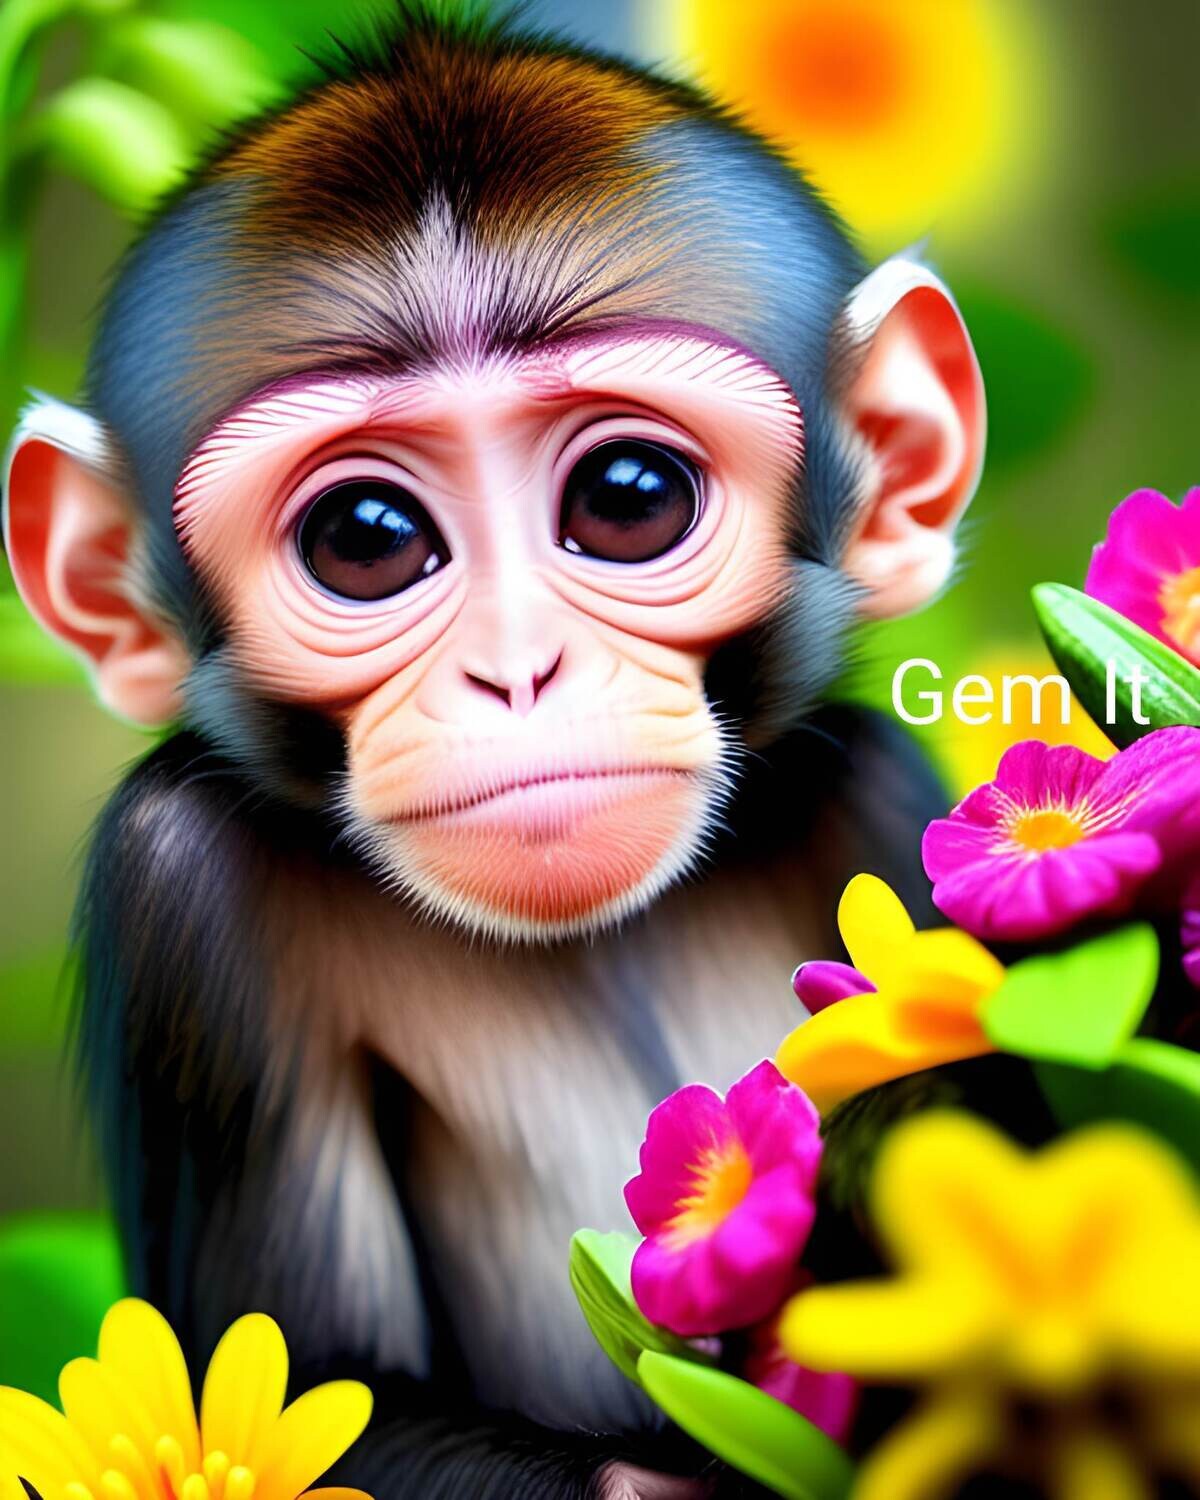 Cute Monkey - Specially ordered for you. Delivery is approximately 4 - 6 weeks.